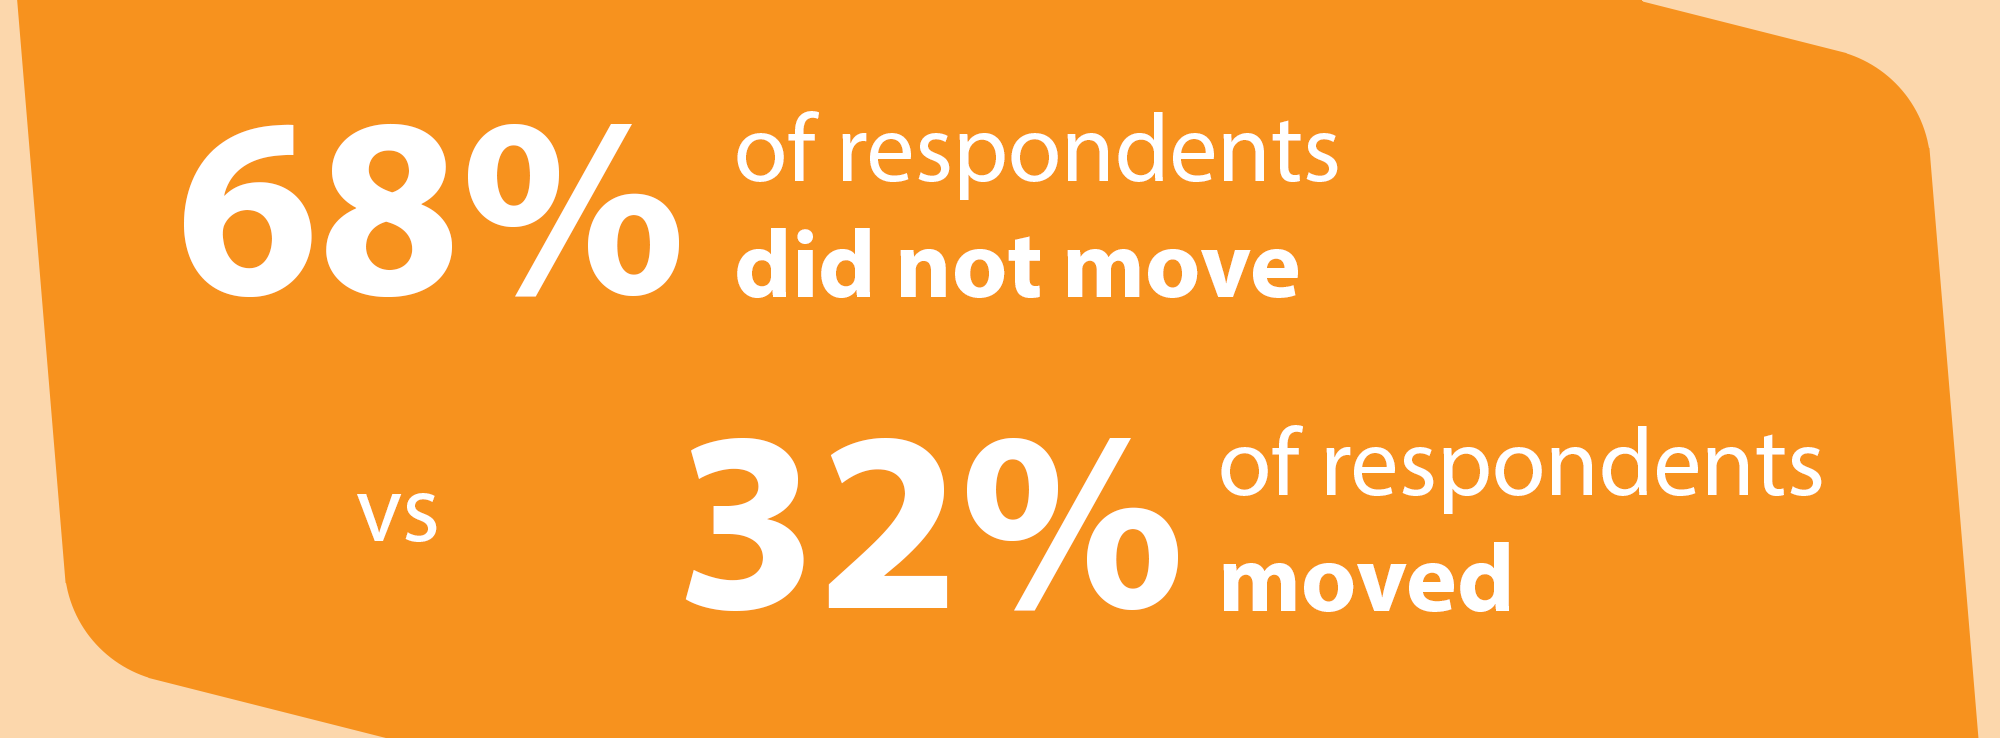 Tenancy moves over the past 12 months. 68% of respondents did not move. 32% of respondents moved